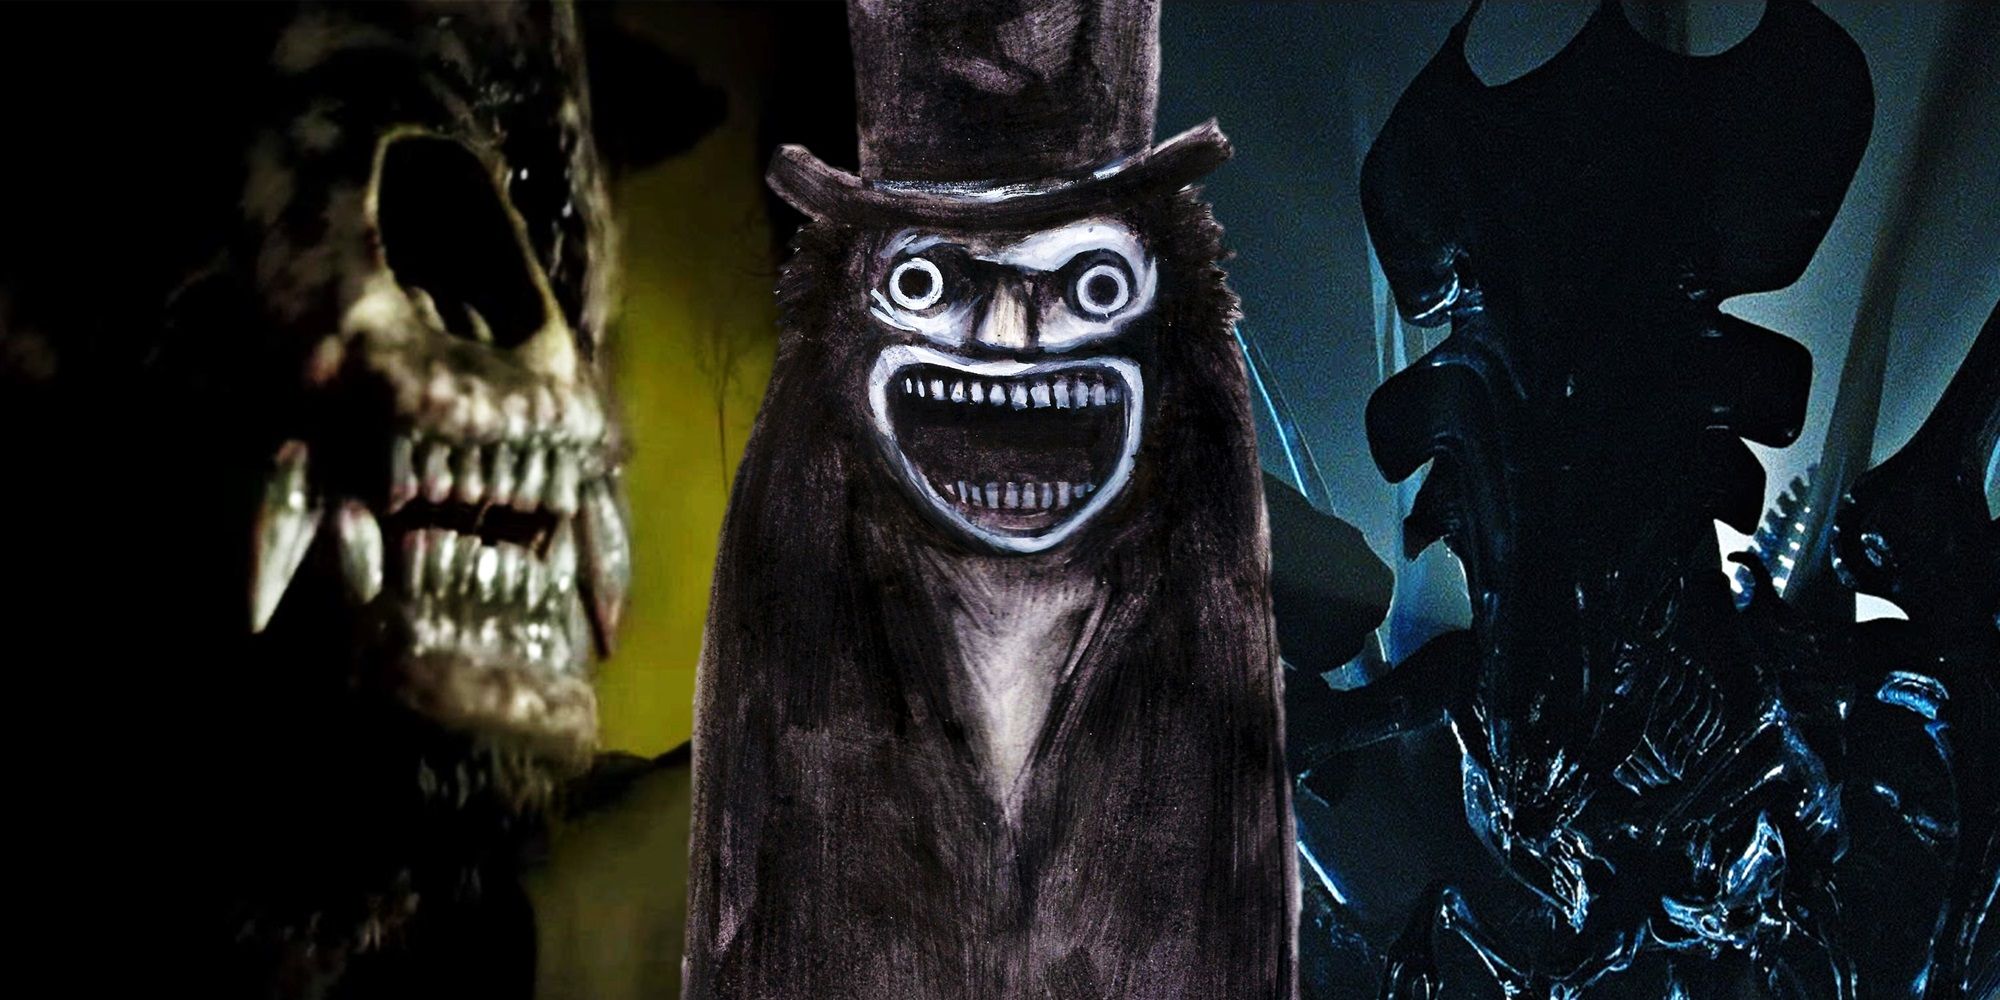 Collage of the bear in Annihilation, the creature in The Babadook, and the Queen in Aliens